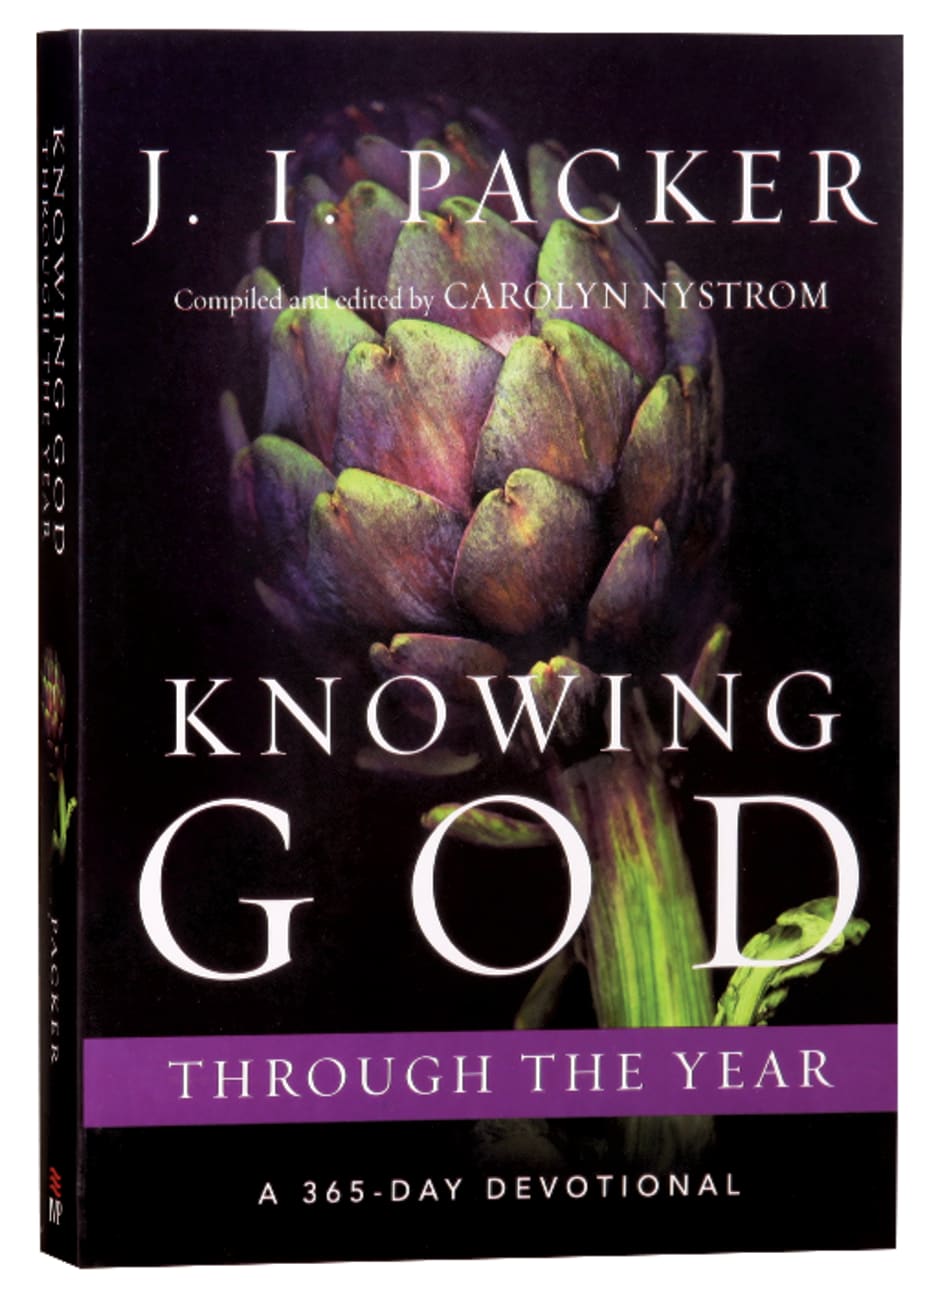 Knowing God Through the Year (Through The Year Devotionals Series) Paperback